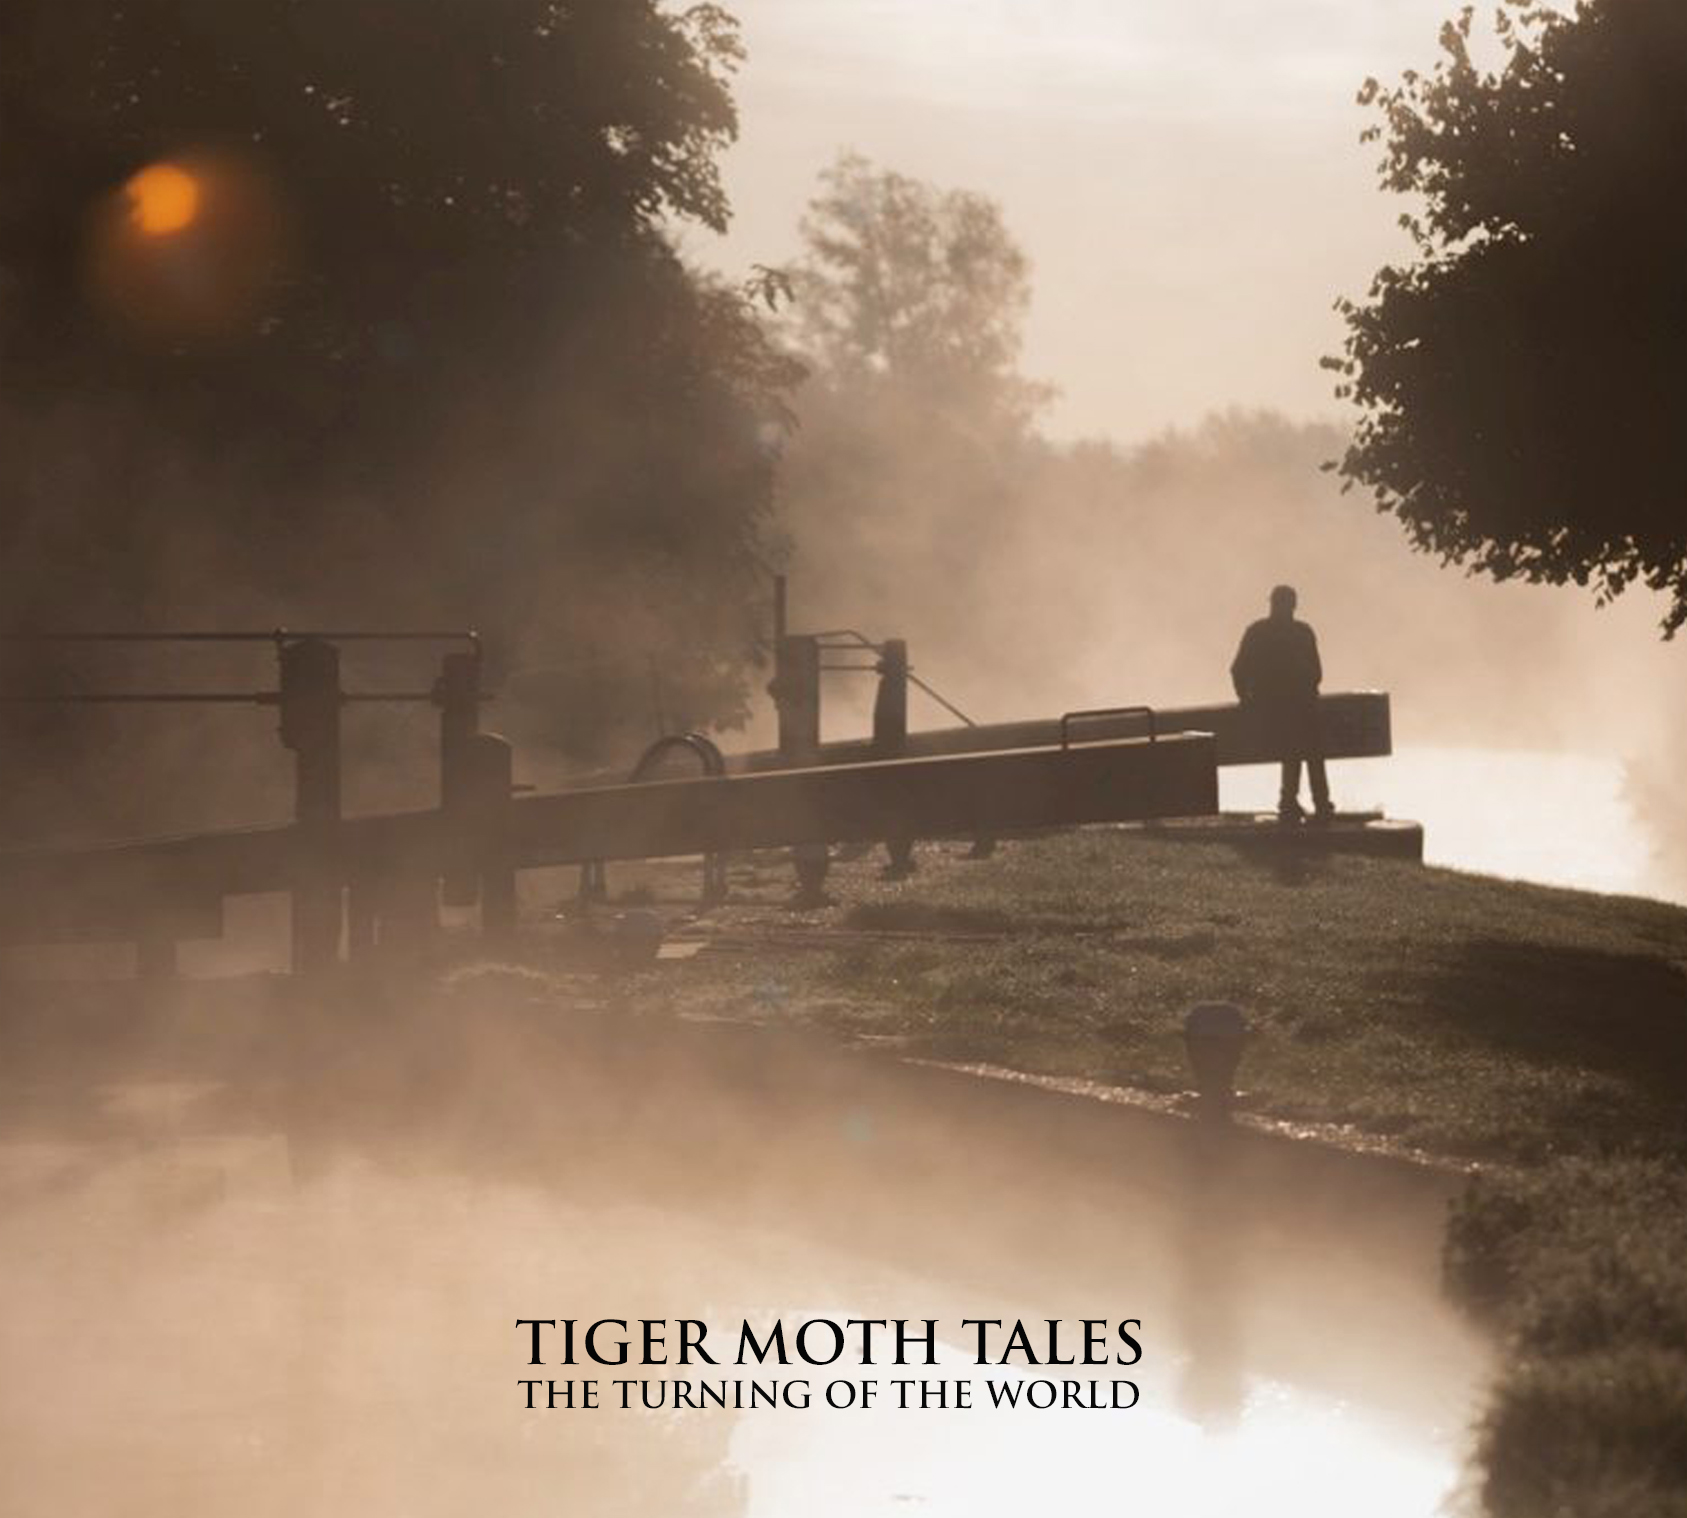 TIGER MOTH TALES – The Turning Of The World